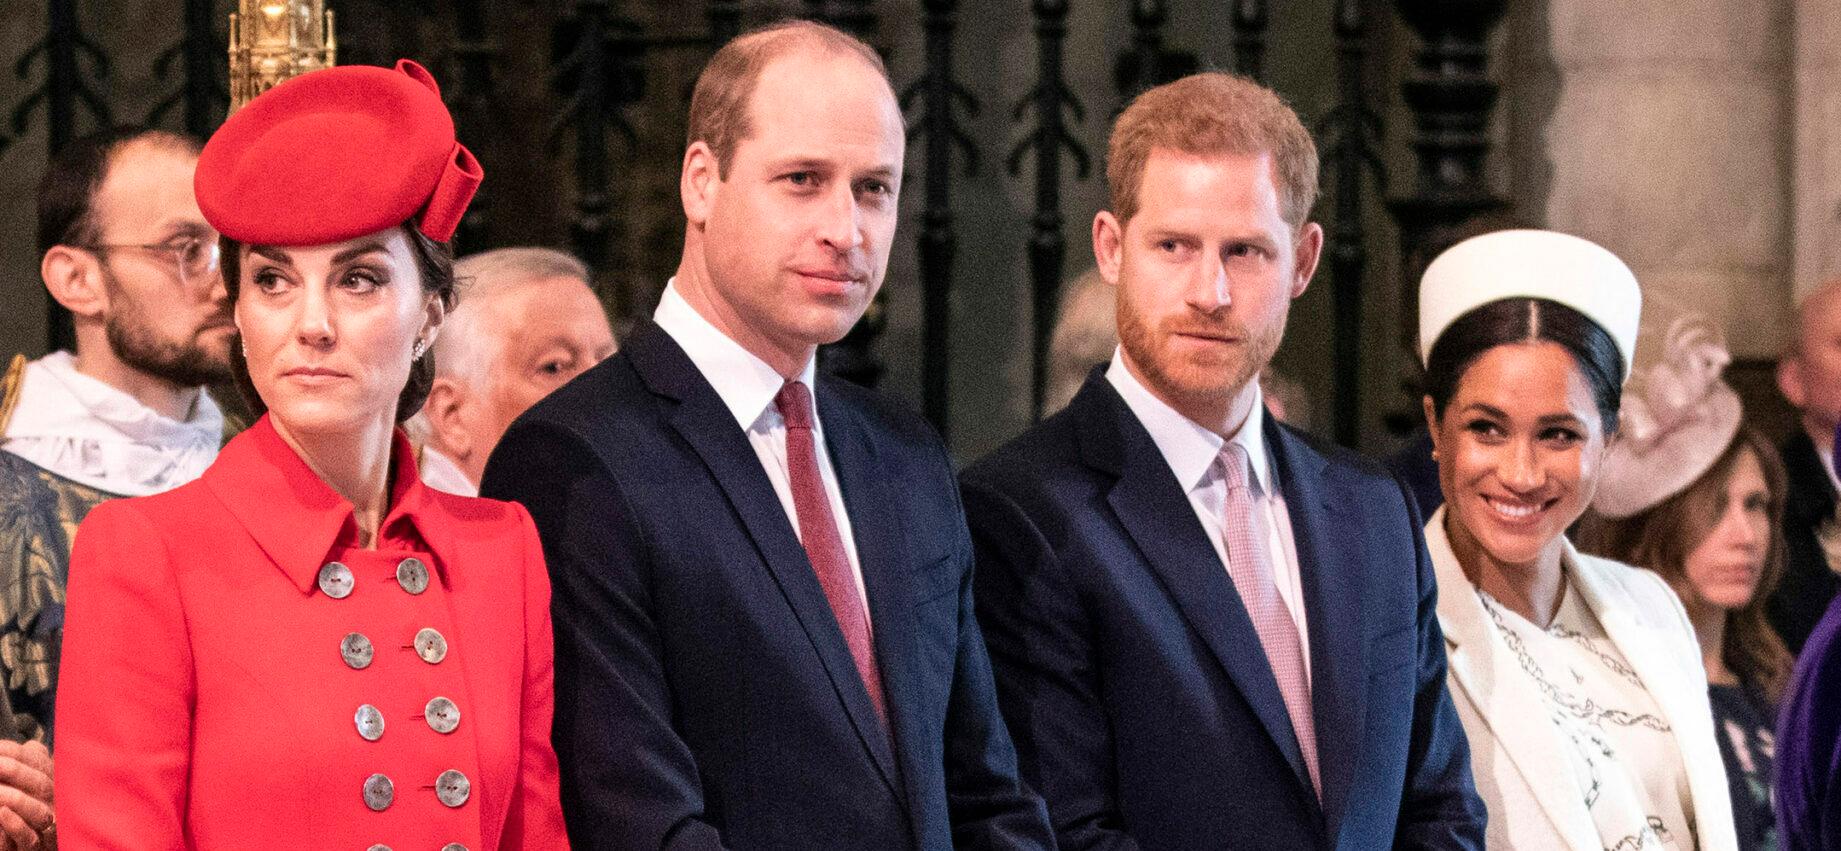 Prince Harry Opens Up About ‘Wedge’ Between Him And Prince William